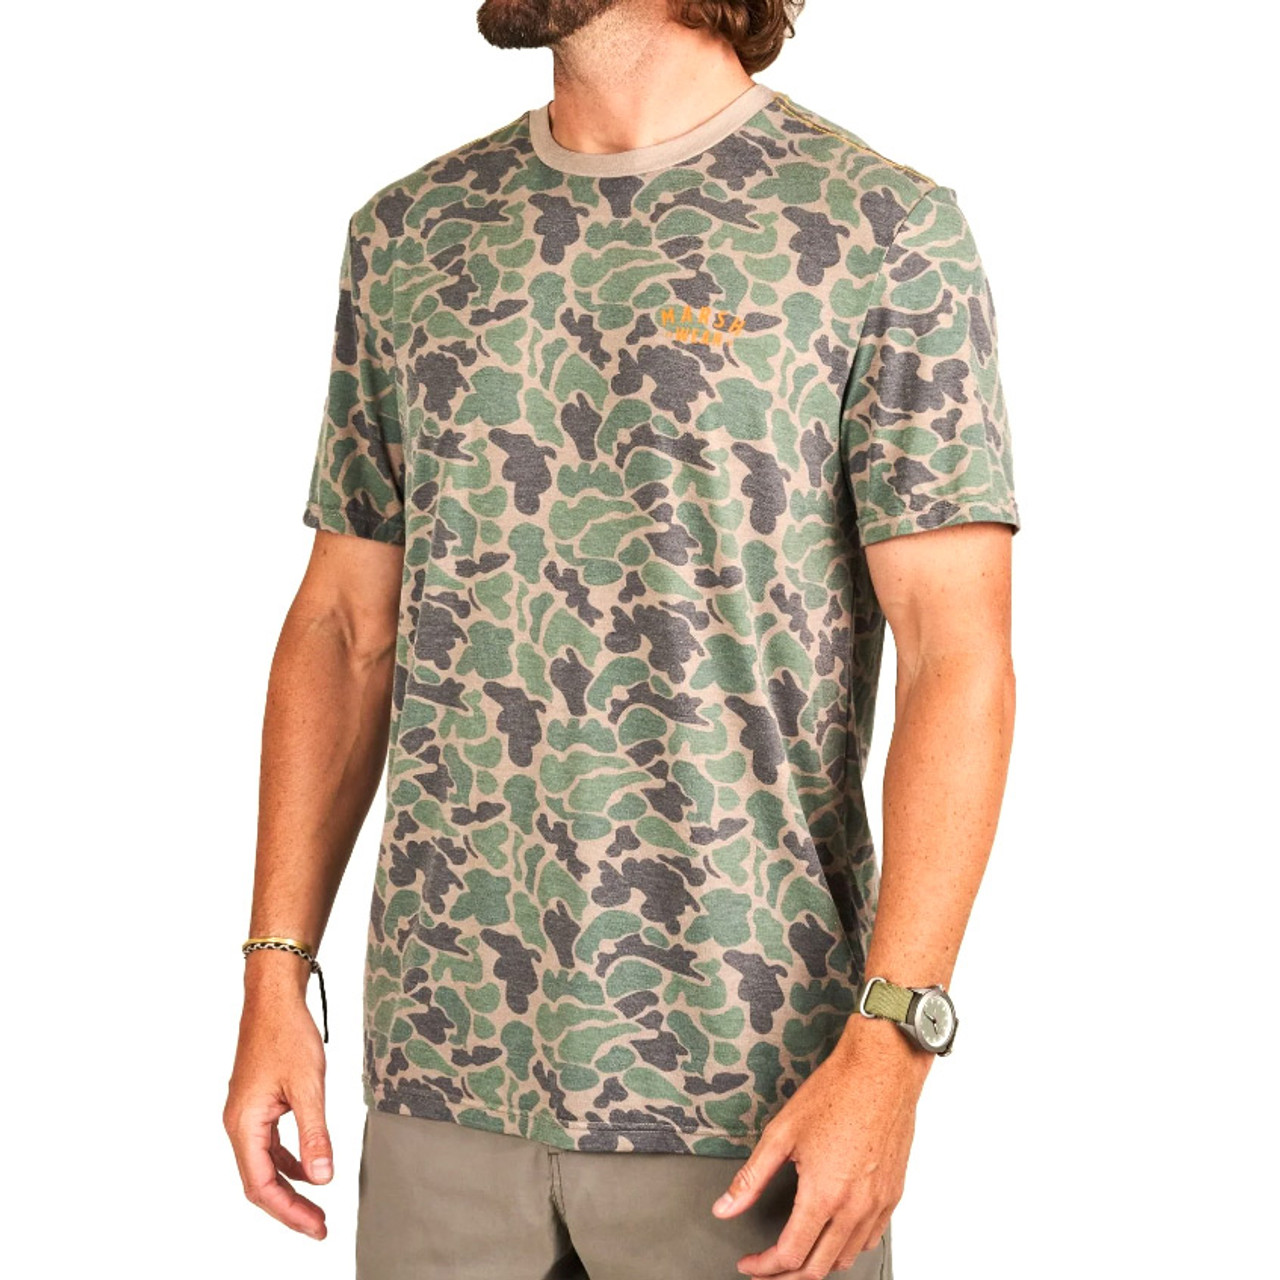 Stackhouse Green Camo Tech Tee by Marsh Wear - Front